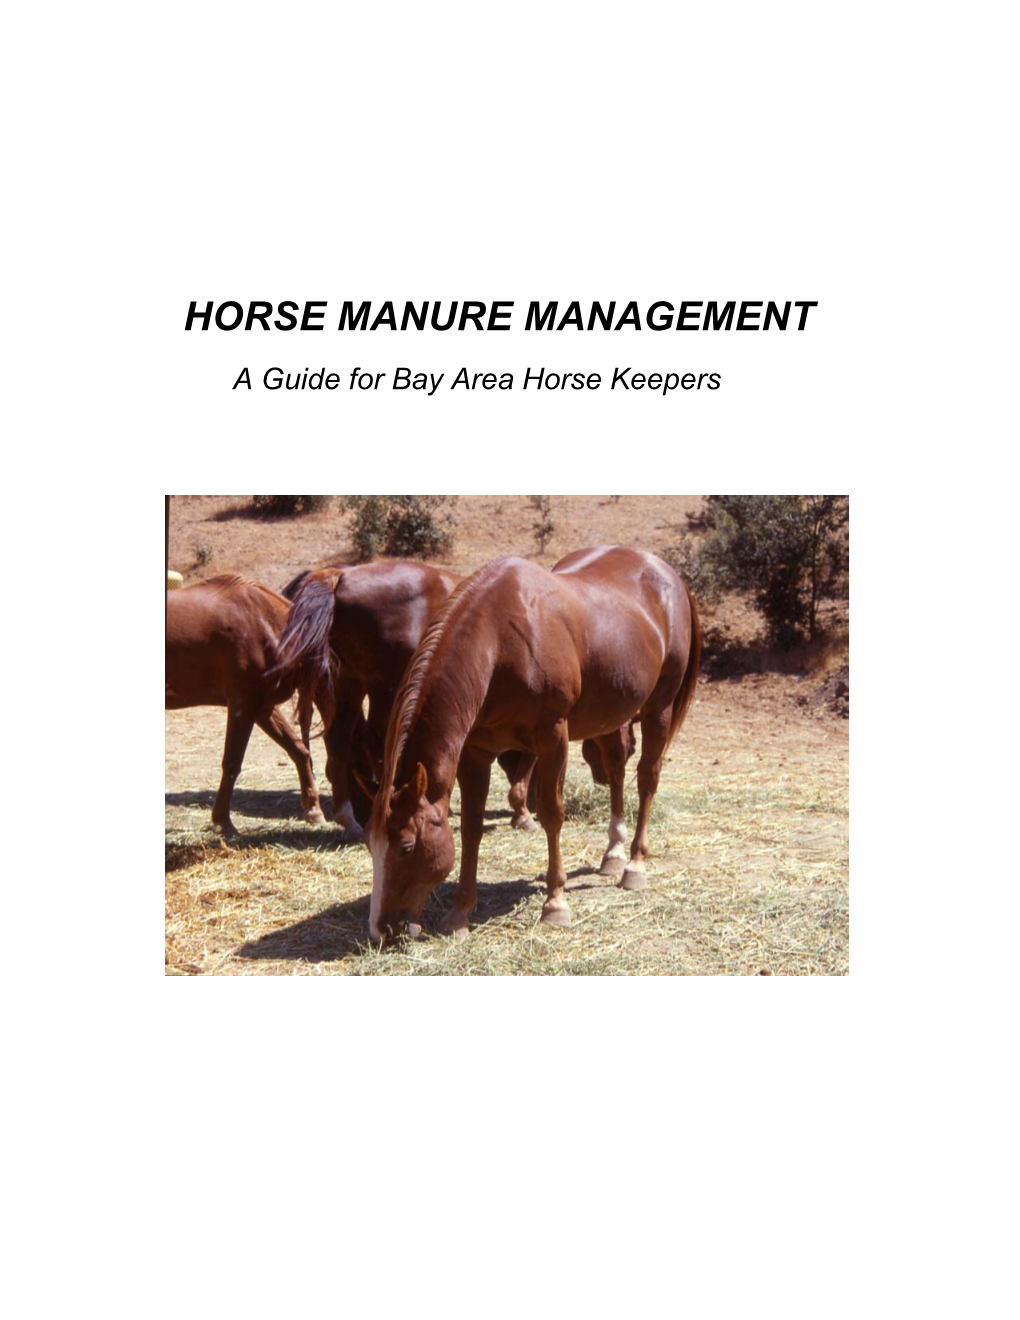 HORSE MANURE MANAGEMENT a Guide for Bay Area Horse Keepers Purpose of This Guide